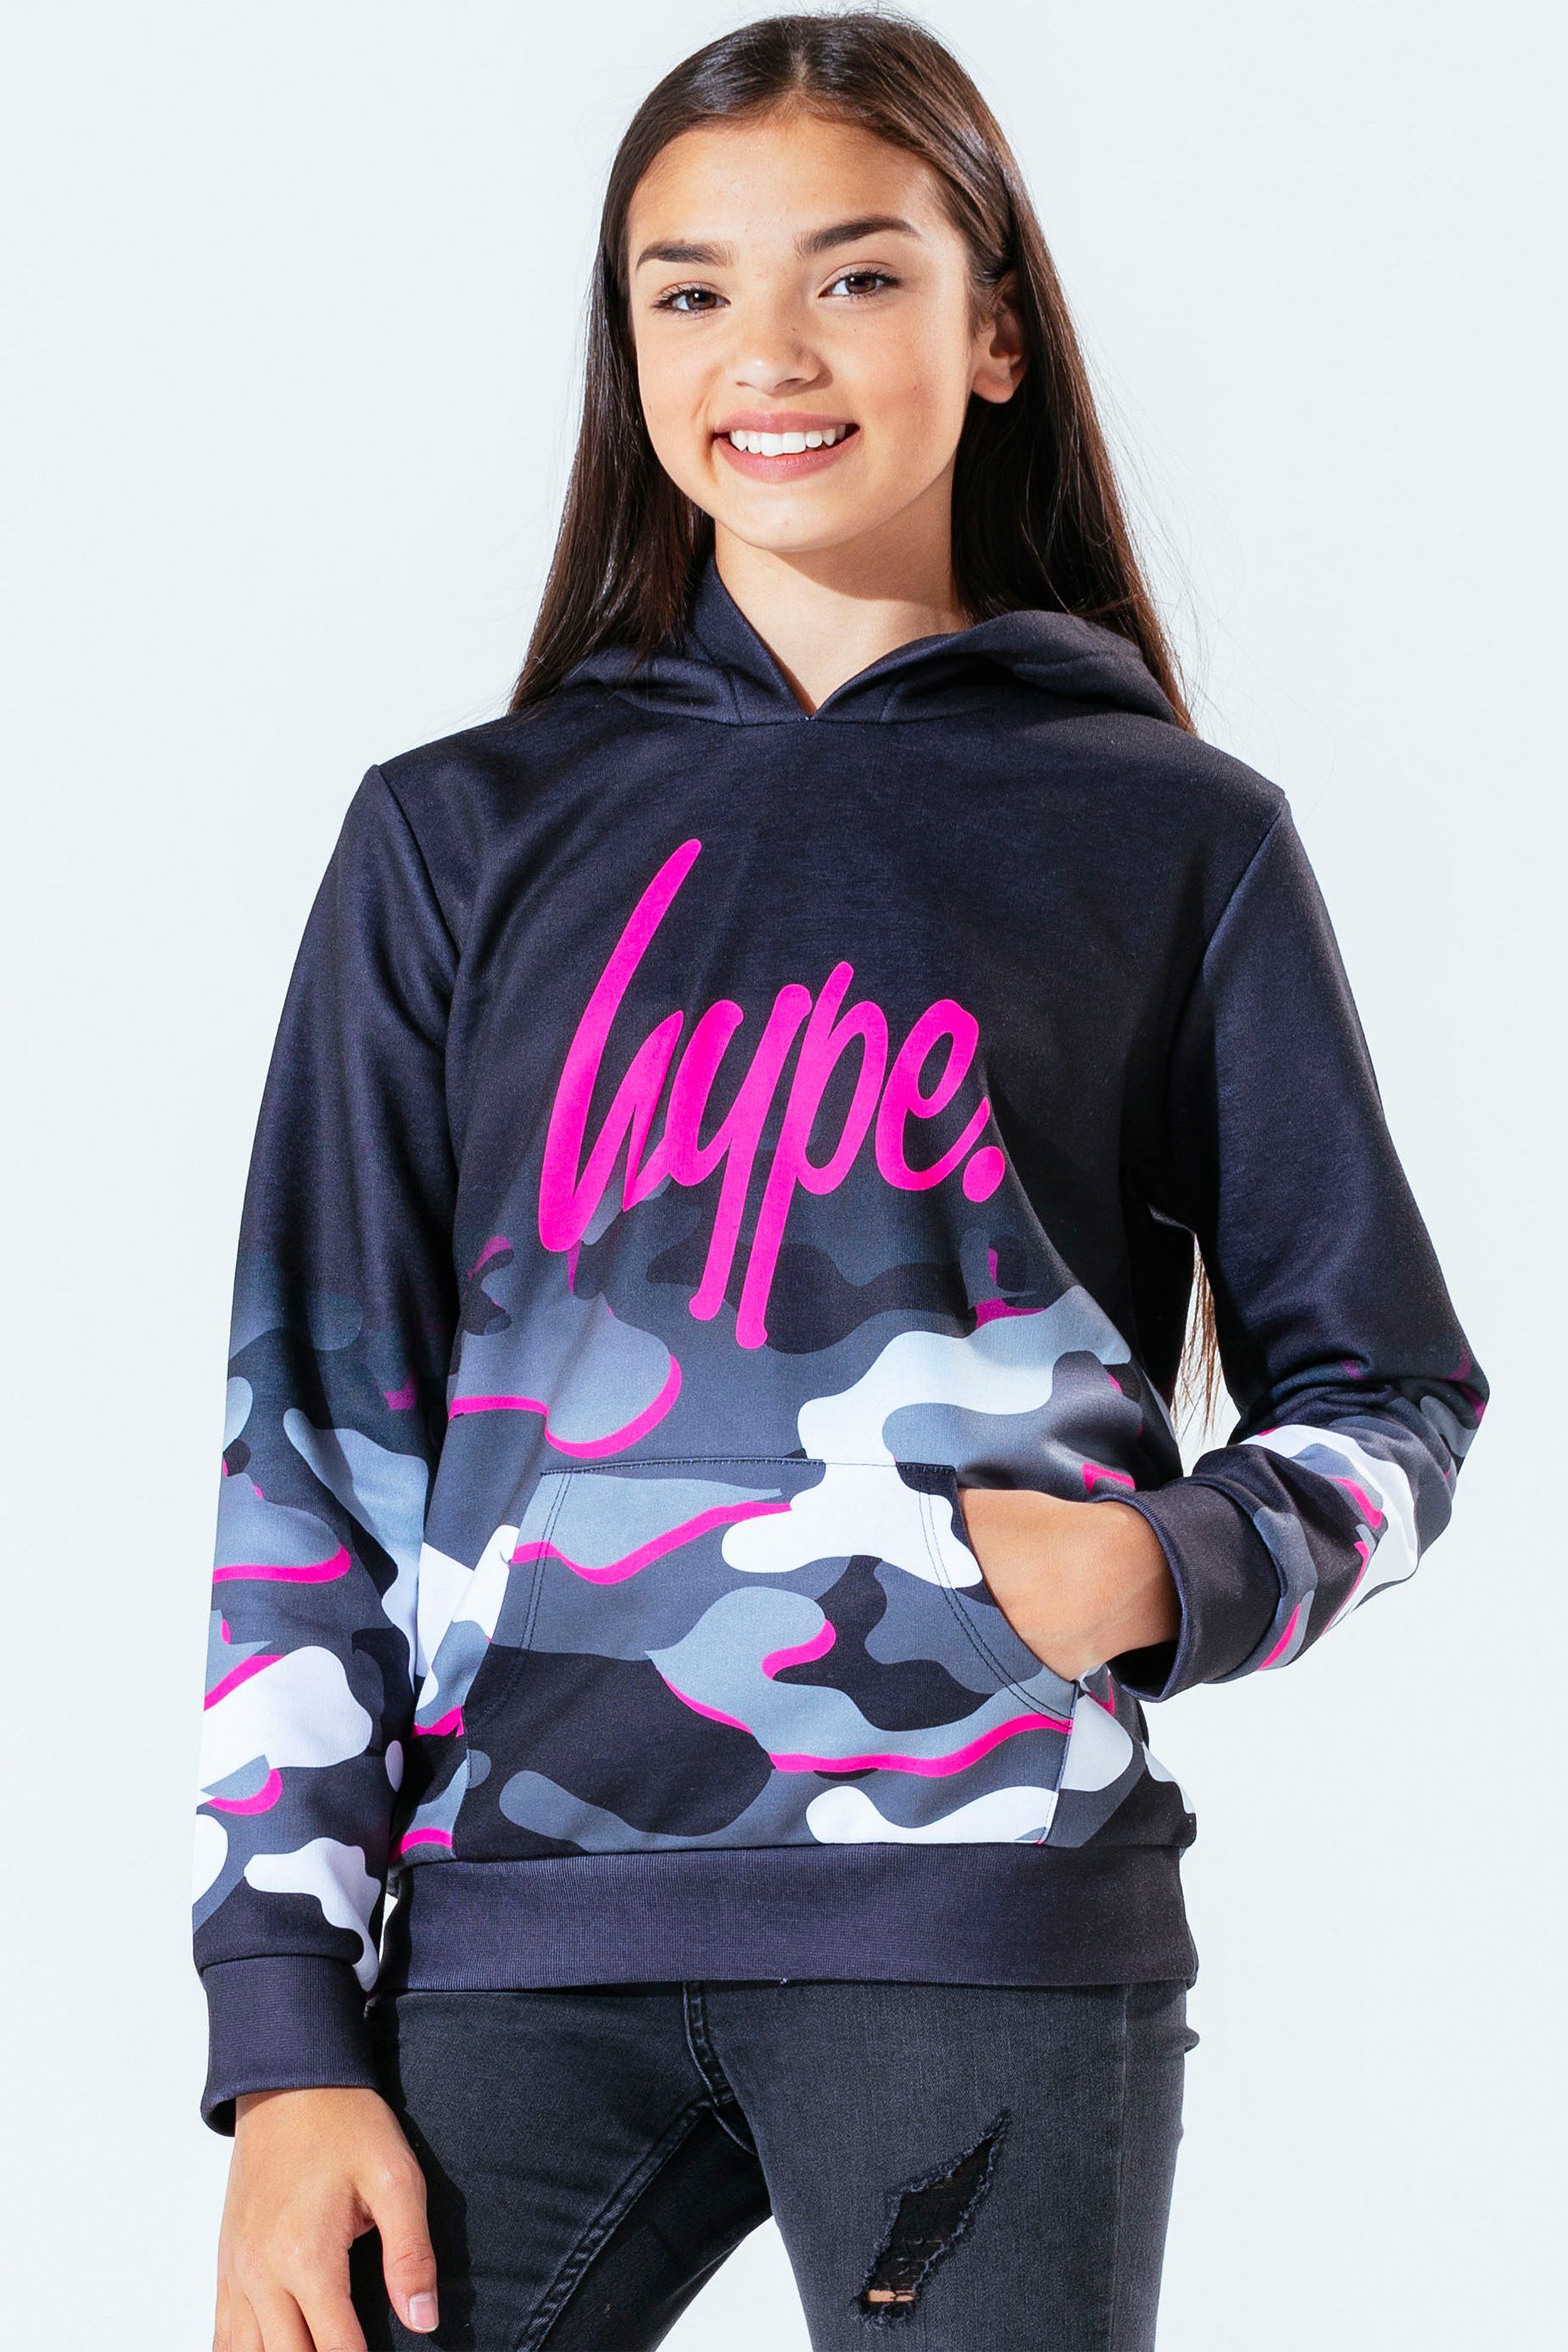 The Hype. pink line camo girls hoodie features our signature camo print in a monochrome, grey and pink injection colour palette. In a 95% polyester and 5% cotton fabric base for supreme comfort in our standard kids pullover shape, highlighting a fixed hood, kangaroo pocket and fitted hem and cuffs. Finished with the iconic HYPE. script logo in a holographic fabric. Wear with cycle shorts for an on-trend look. Machine wash at 30 degrees.